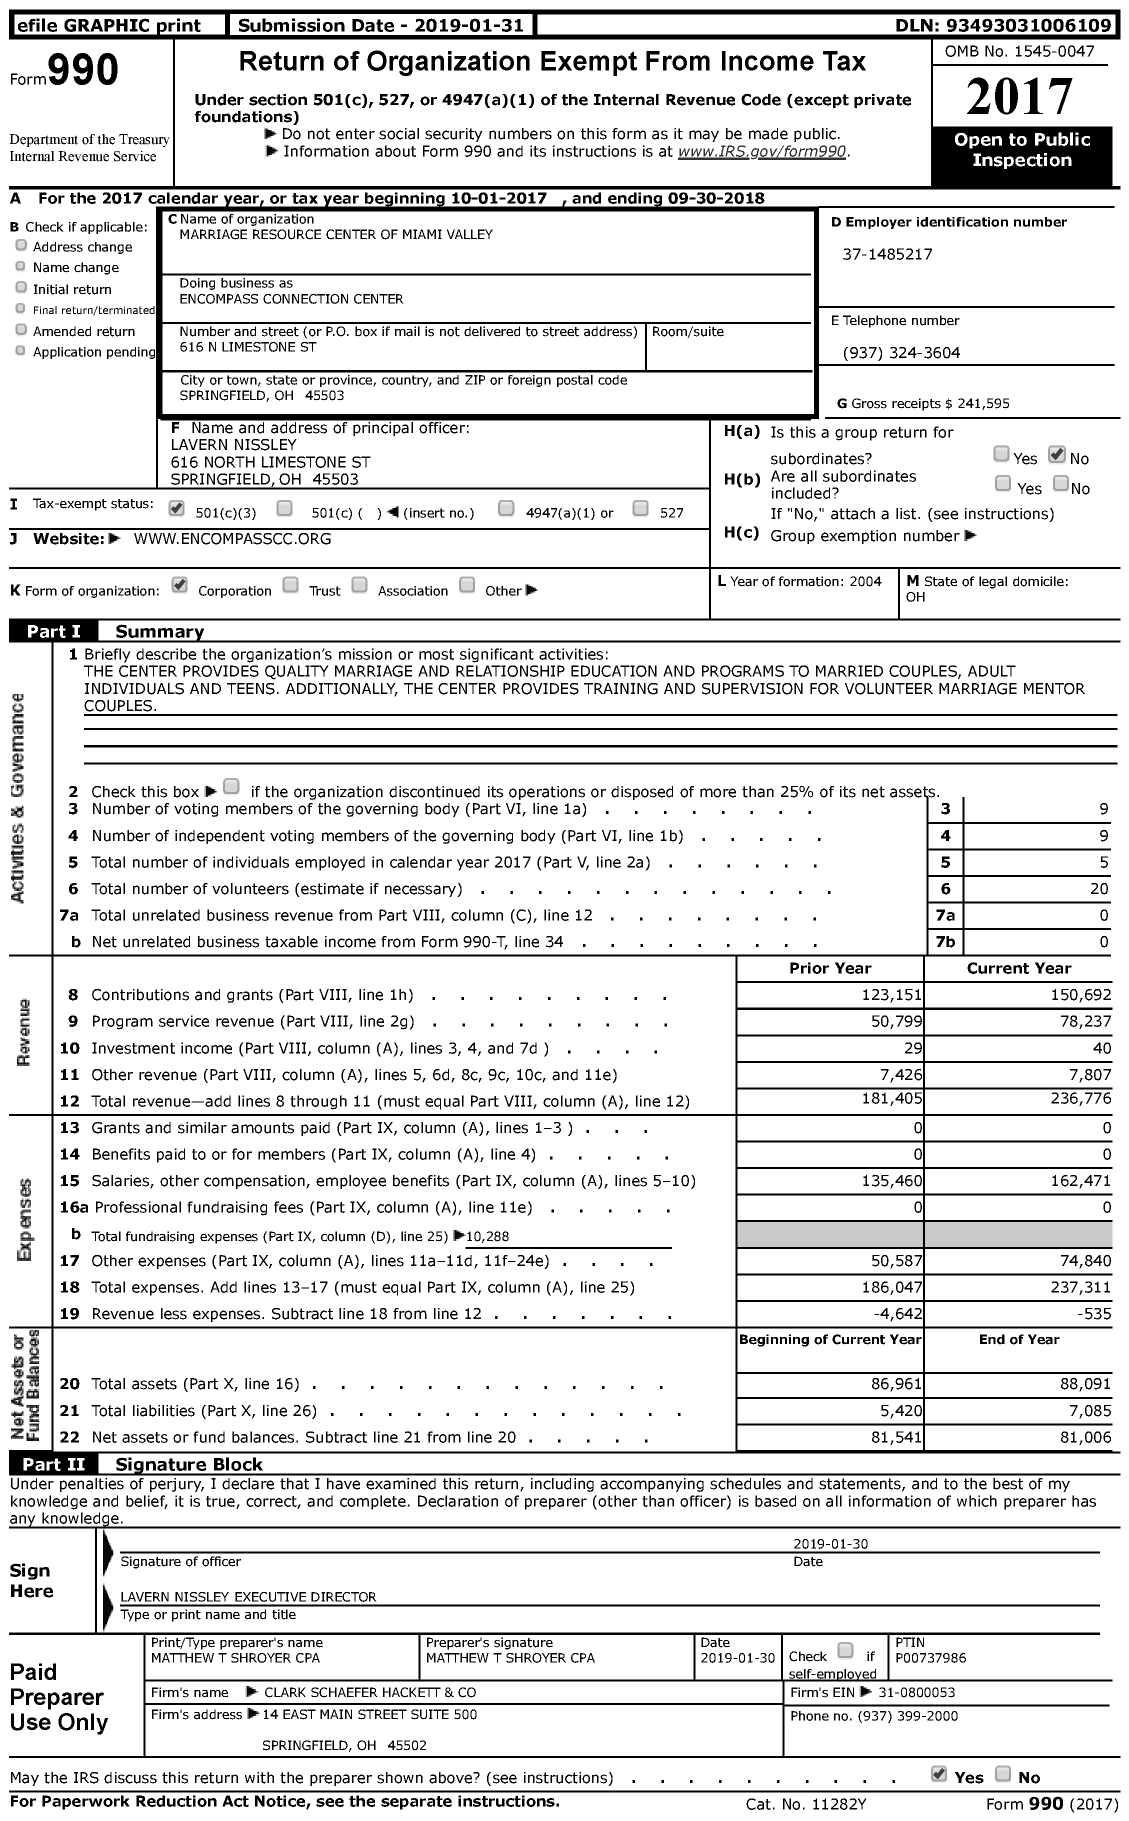 Image of first page of 2017 Form 990 for Encompass Connection Center